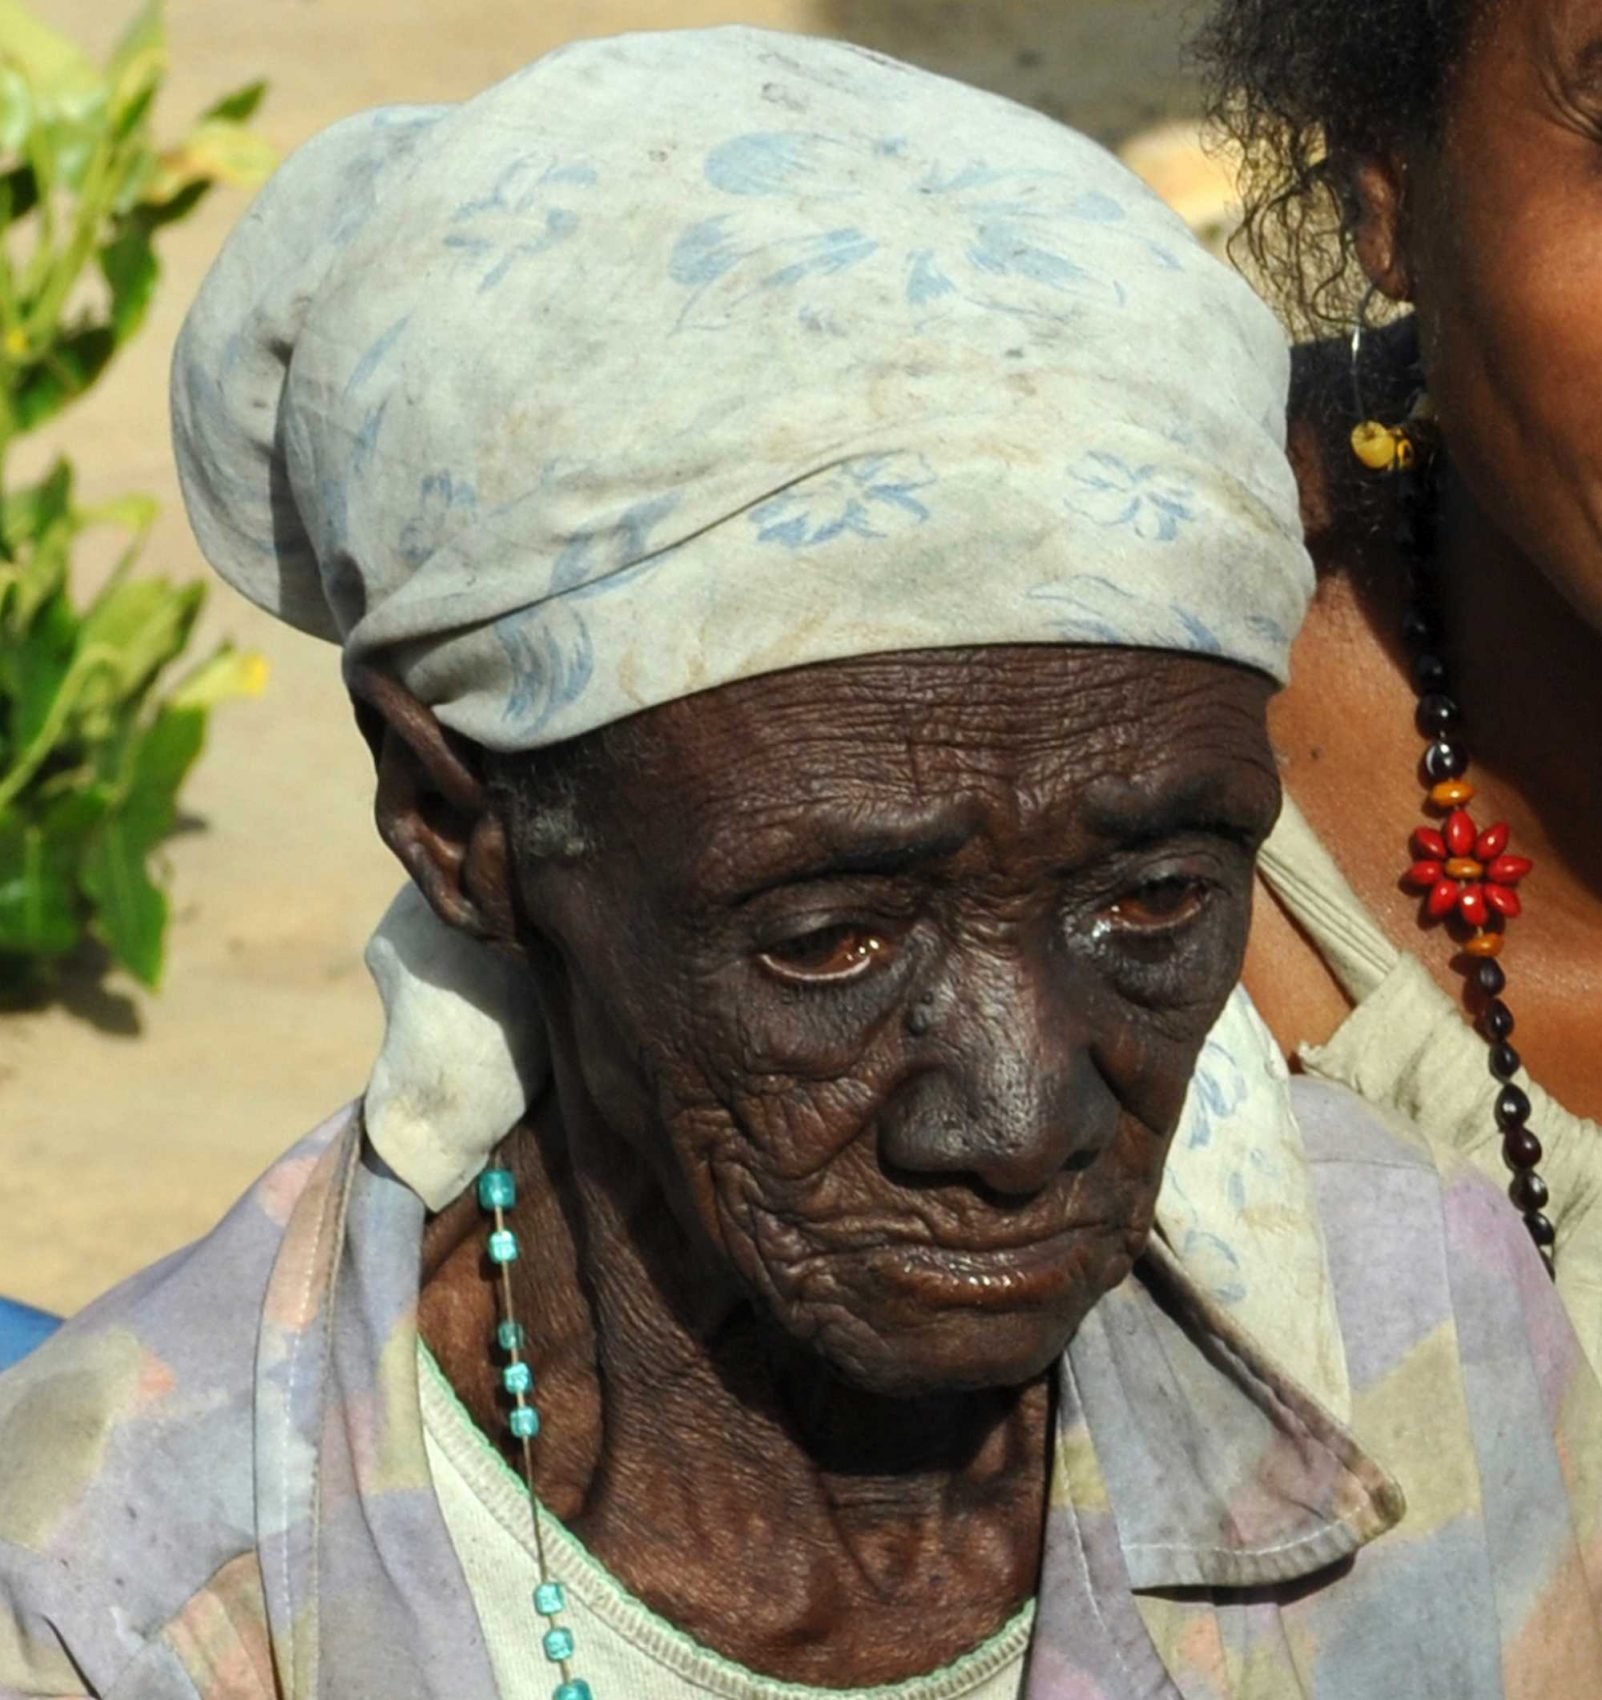 An old quilombola lady from Bahia, in the Brazilian northeast